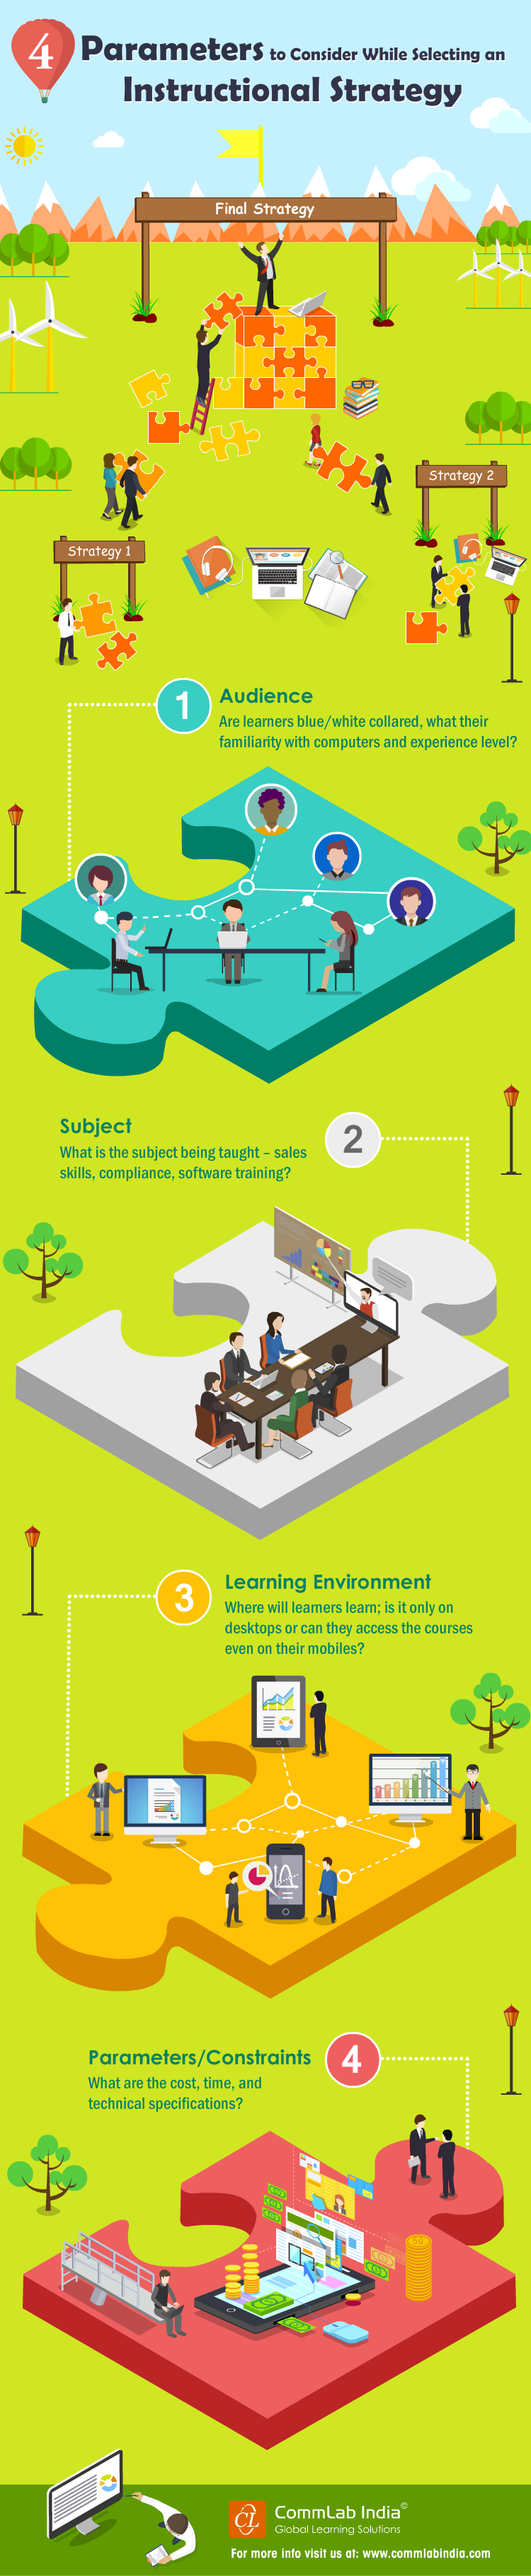 4 Parameters to Consider While Selecting an Instructional Strategy [Infographic]